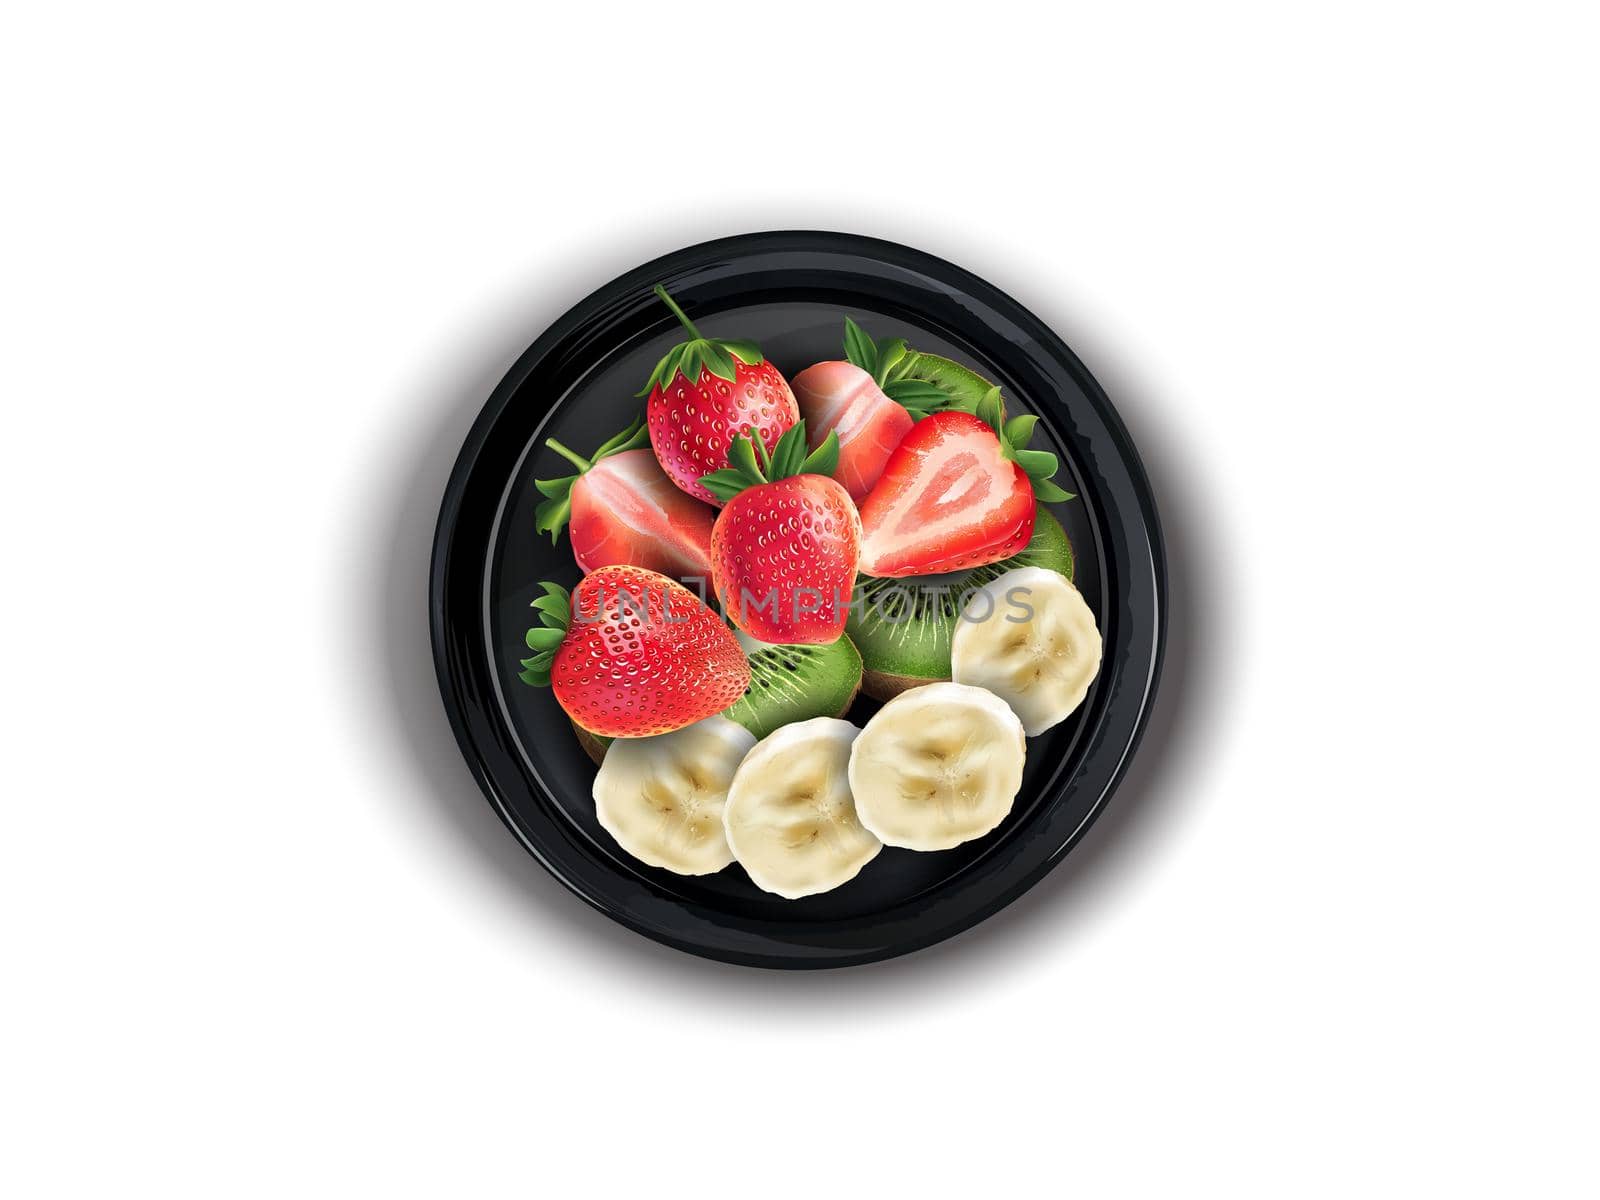 Strawberries with kiwi and banana slices on a black plate. by ConceptCafe